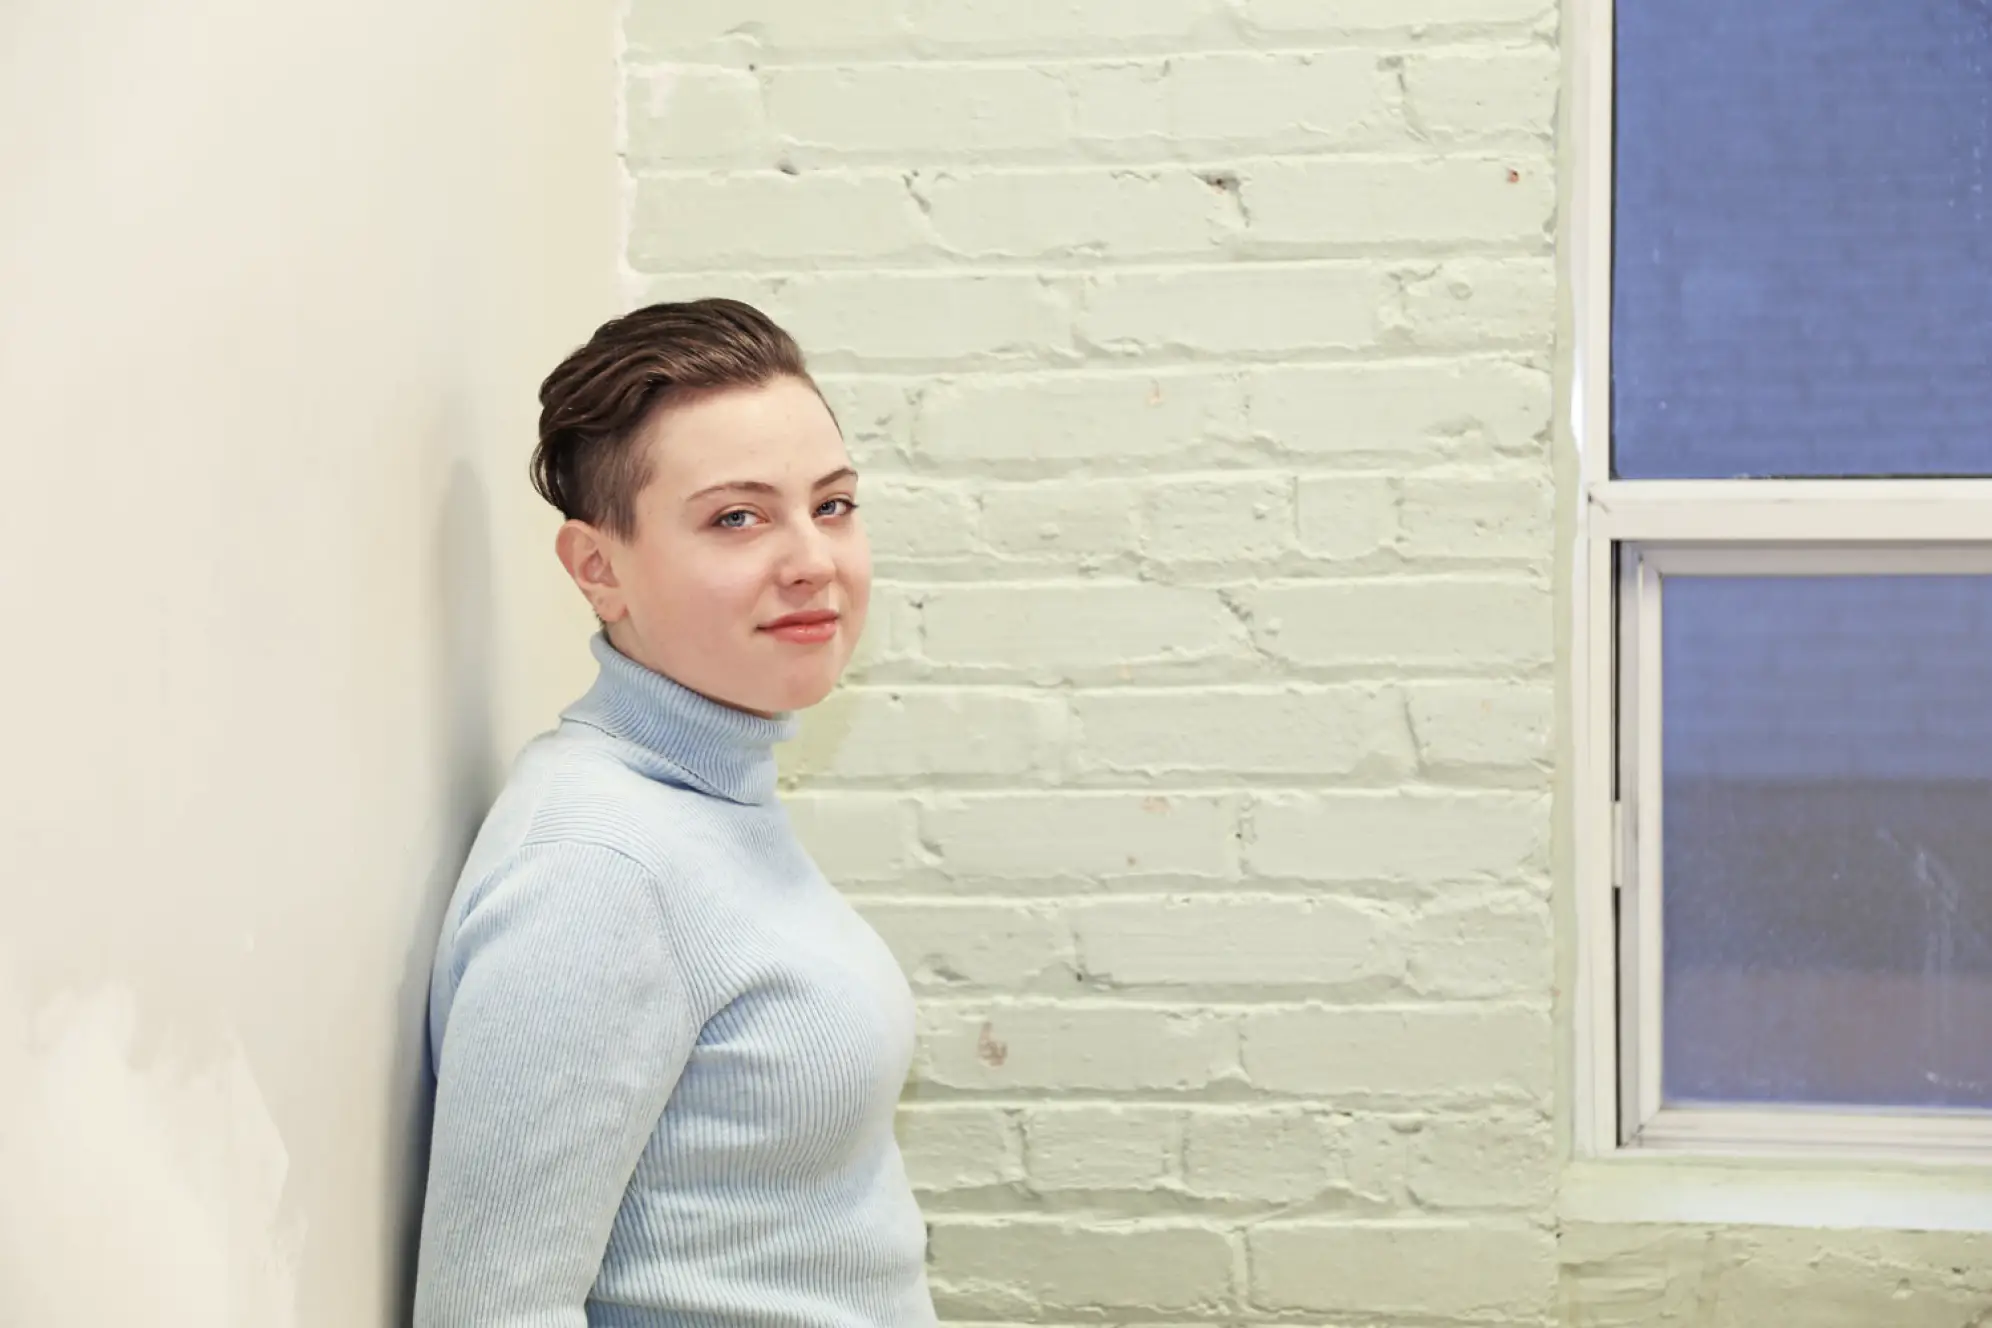 Young woman in grey turtleneck sweater with short hair and smiling at camera while leaning against wall